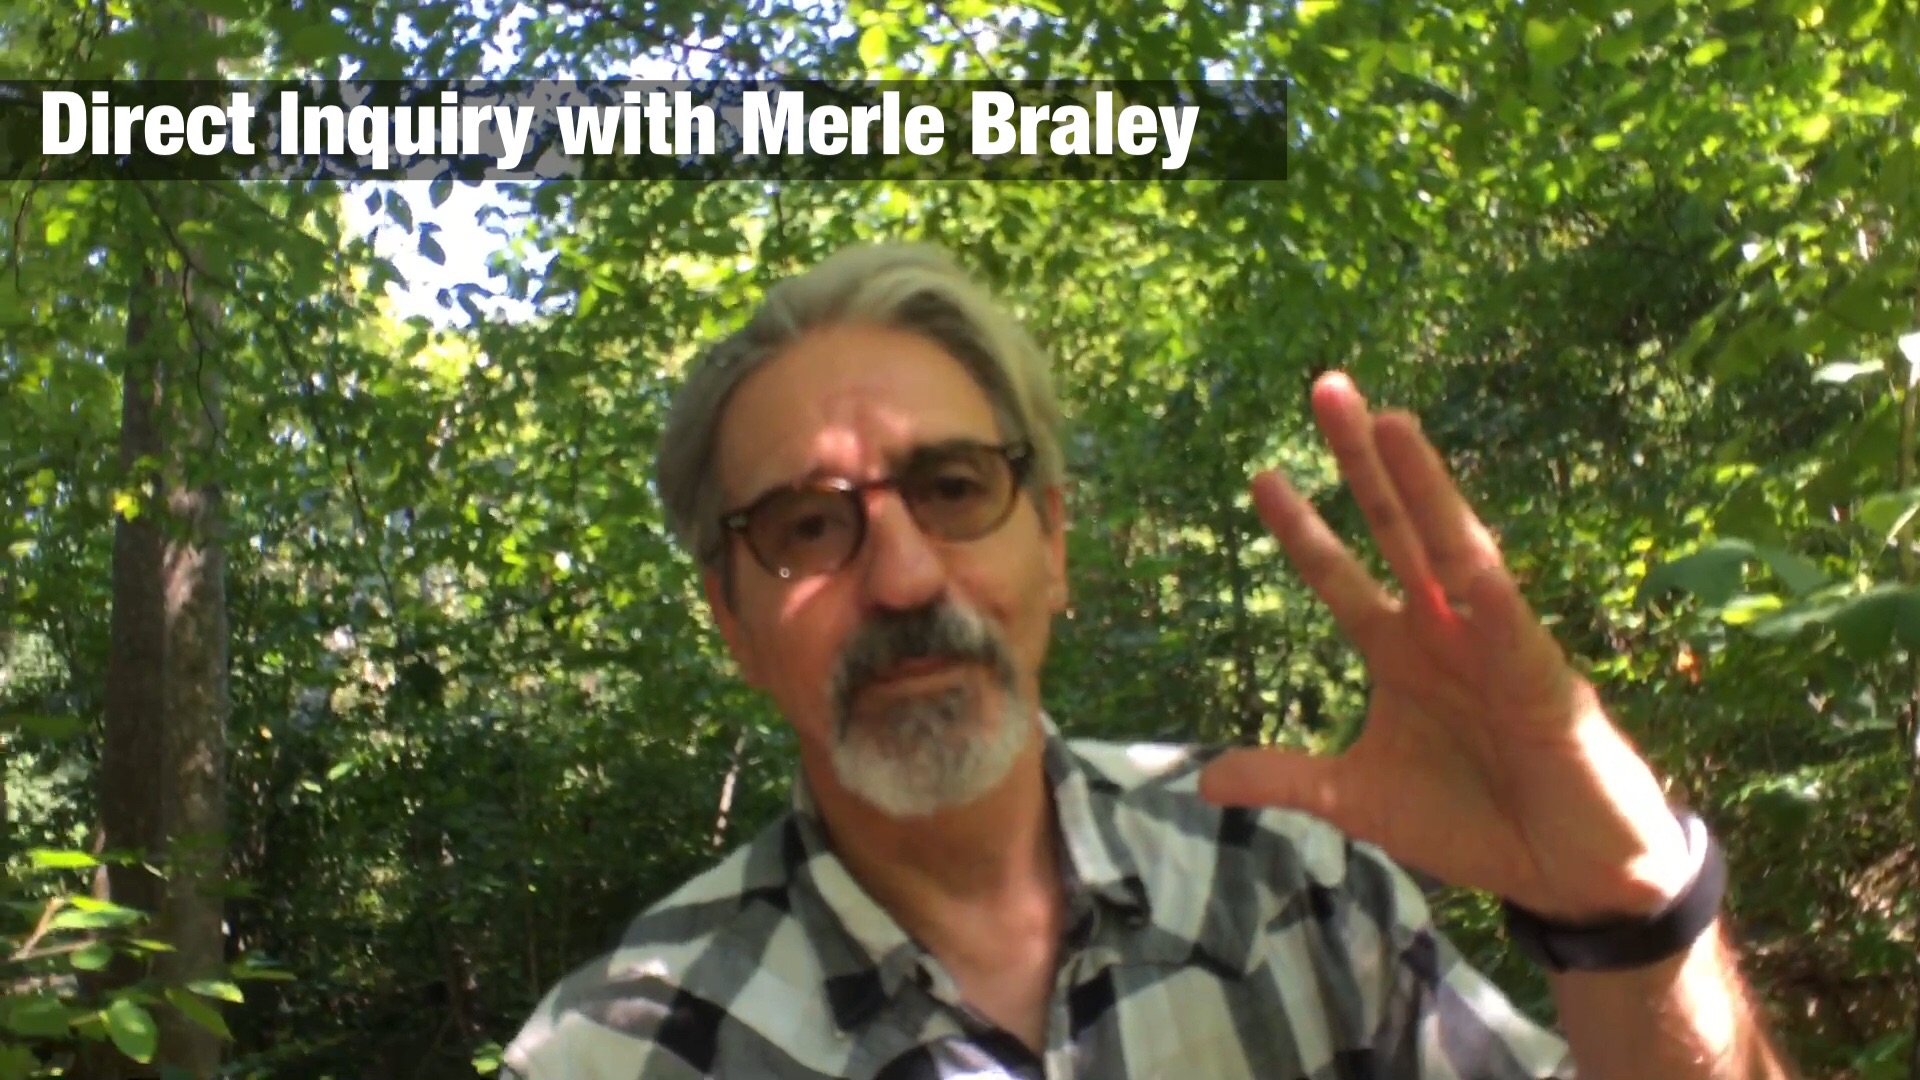 Direct Inquiry with Merle Braley August 17 2015